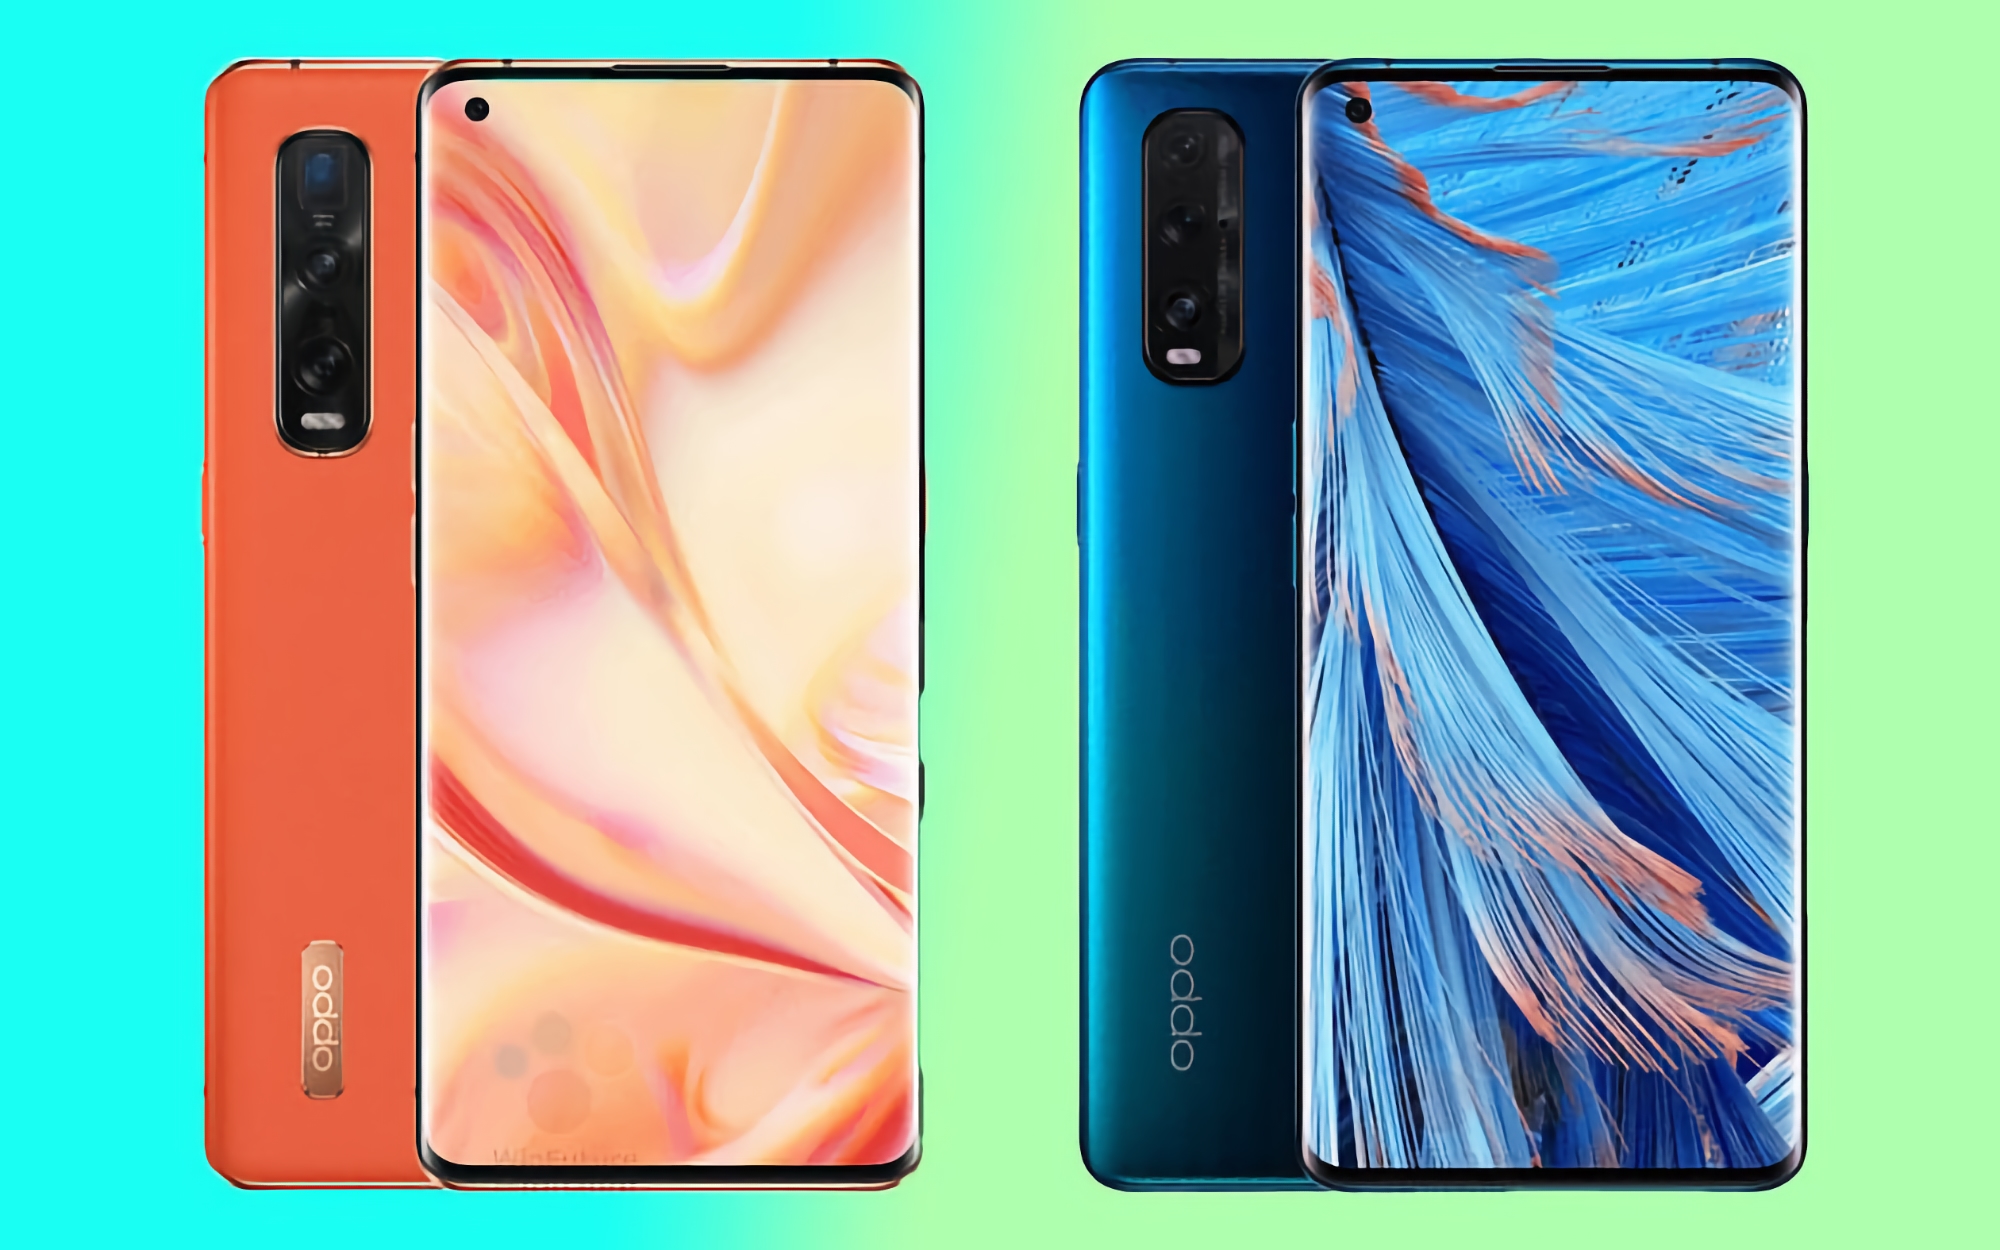 ColorOS 12 stable release with Android 12 on board for OPPO Find X2 and OPPO Find X2 Pro